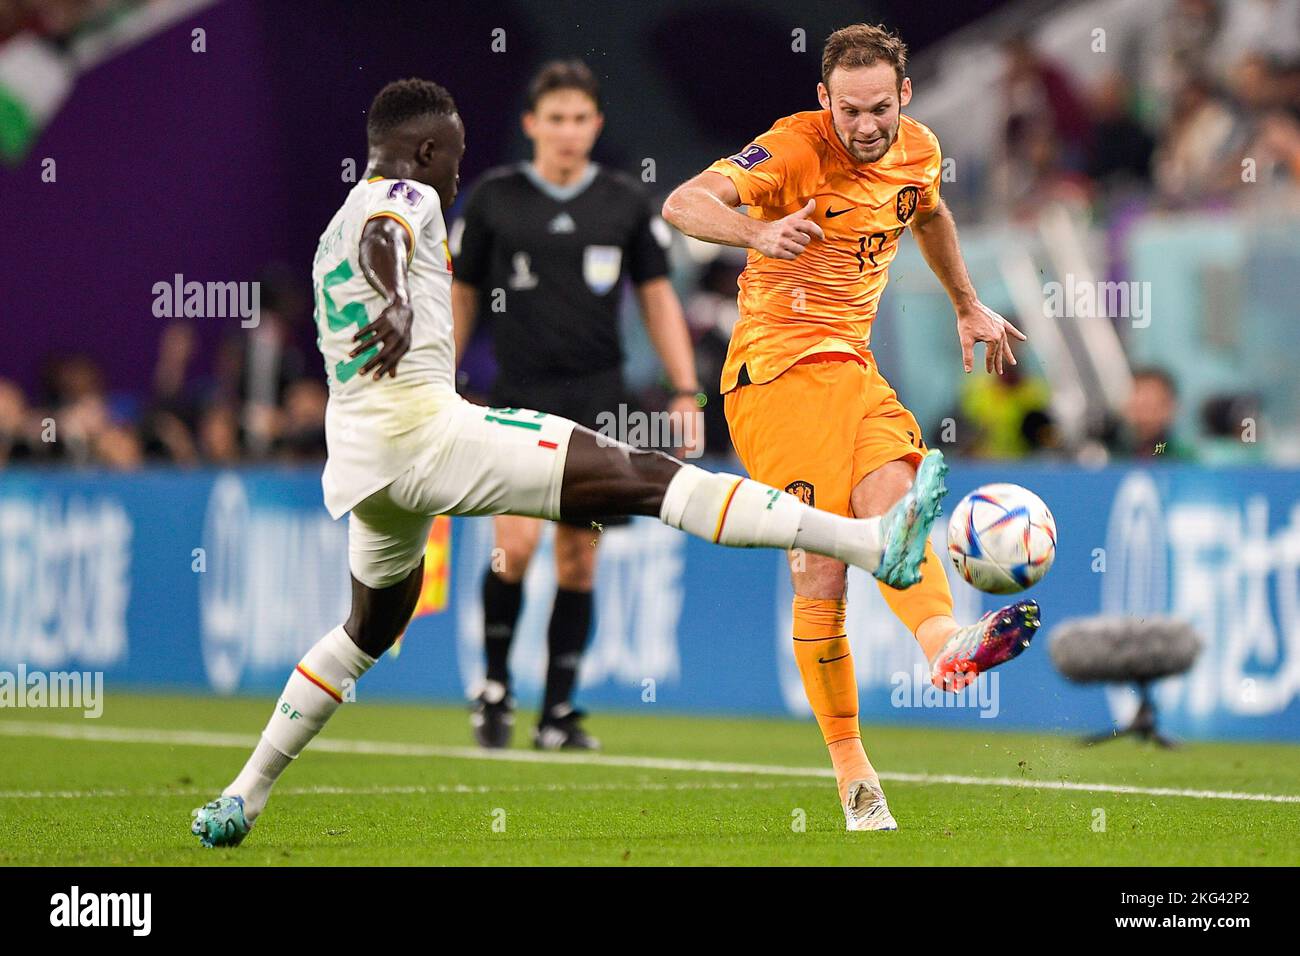 DOHA, QATAR - NOVEMBER 21: Idrissa Gana Gueye of Senegal battles for the ball with Daley Blind of the Netherlands during the Group A - FIFA World Cup Qatar 2022 match between Senegal and Netherlands at Al Thumama Stadium on November 21, 2022 in Doha, Qatar (Photo by Pablo Morano/BSR Agency) Stock Photo